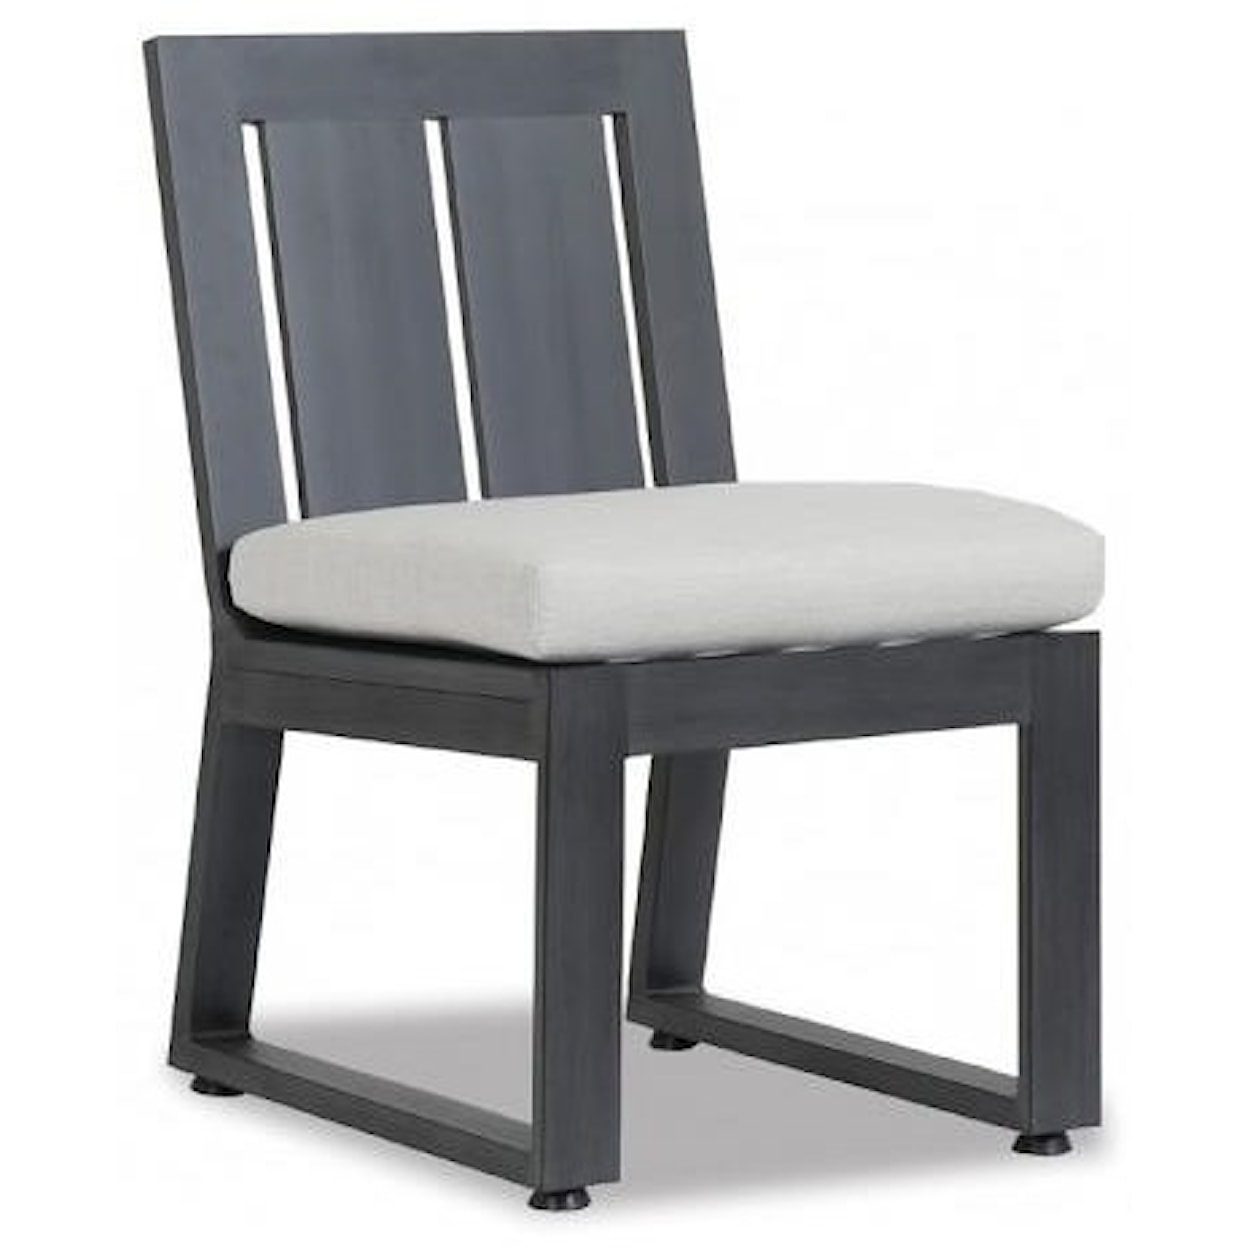 Sunset West Redondo Armless Dining Chair